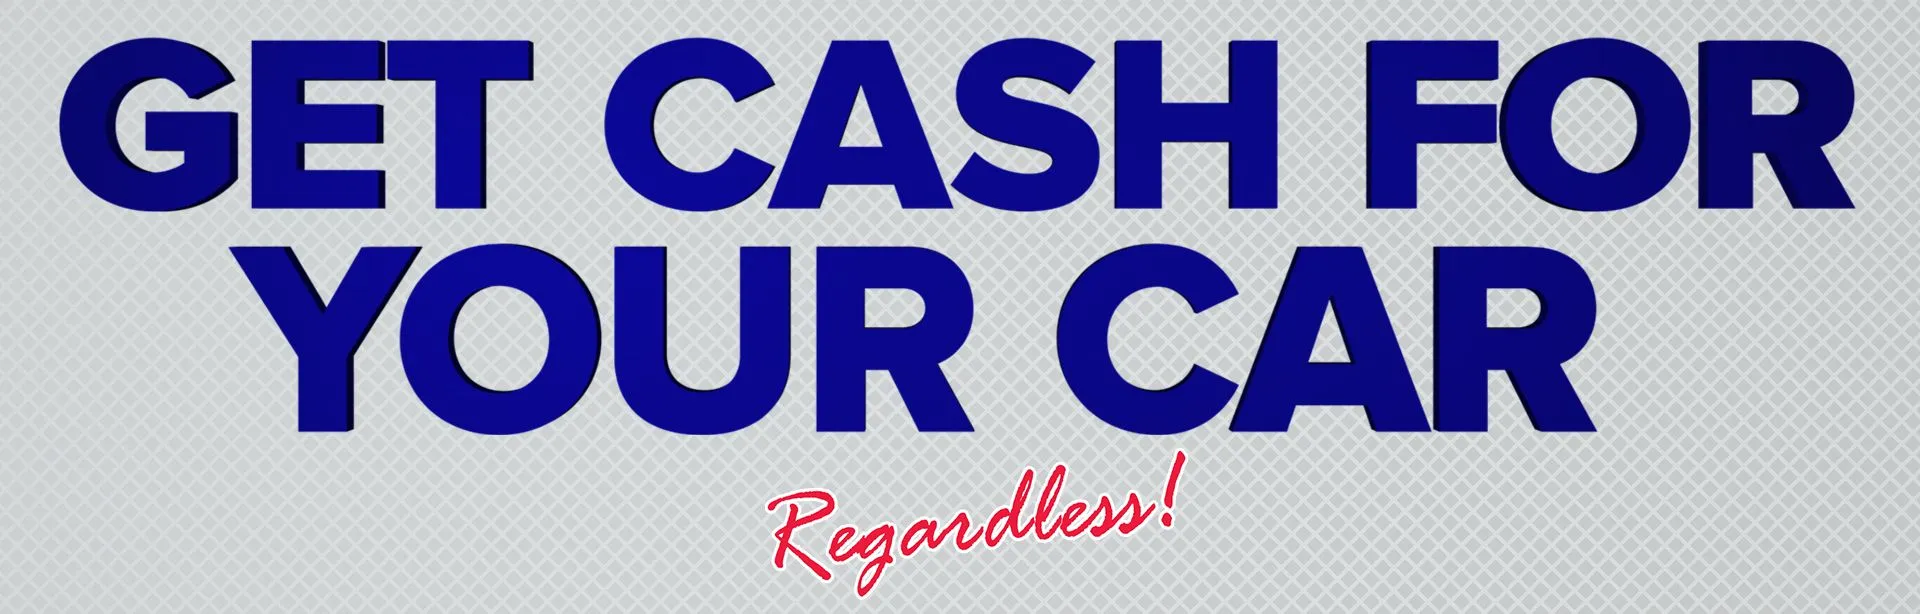 Get Cash for Your Car TODAY!